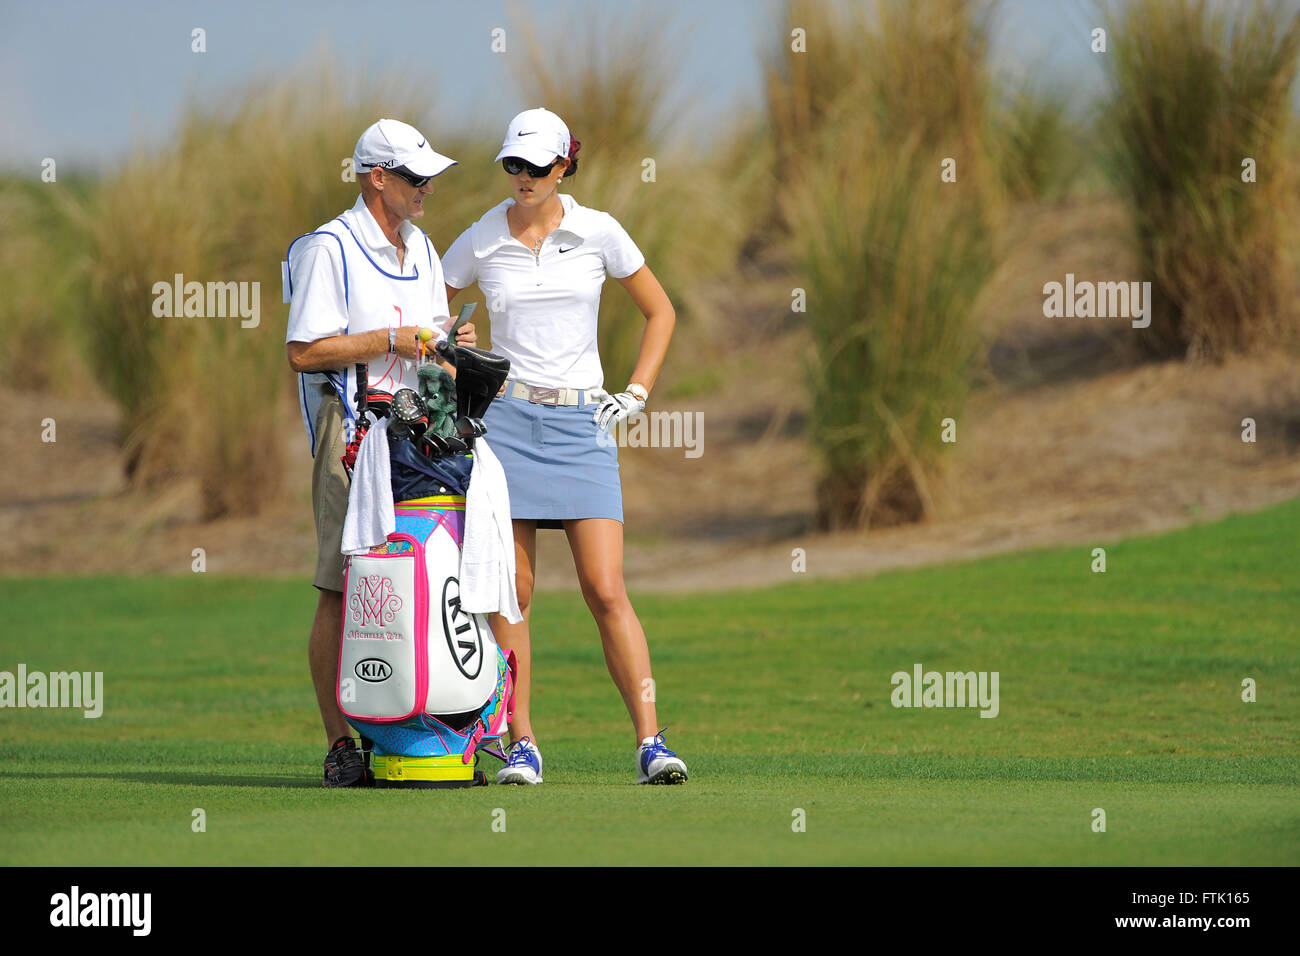 Orlando, Fla, USA. 17th Nov, 2011. Michelle Wie and her caddie during the first round of the CME Group Titleholders at Grand Cypress Resort on Nov. 17, 2011 in Orlando, Fla. ZUMA PRESS/Scott A. Miller © Scott A. Miller/ZUMA Wire/Alamy Live News Stock Photo